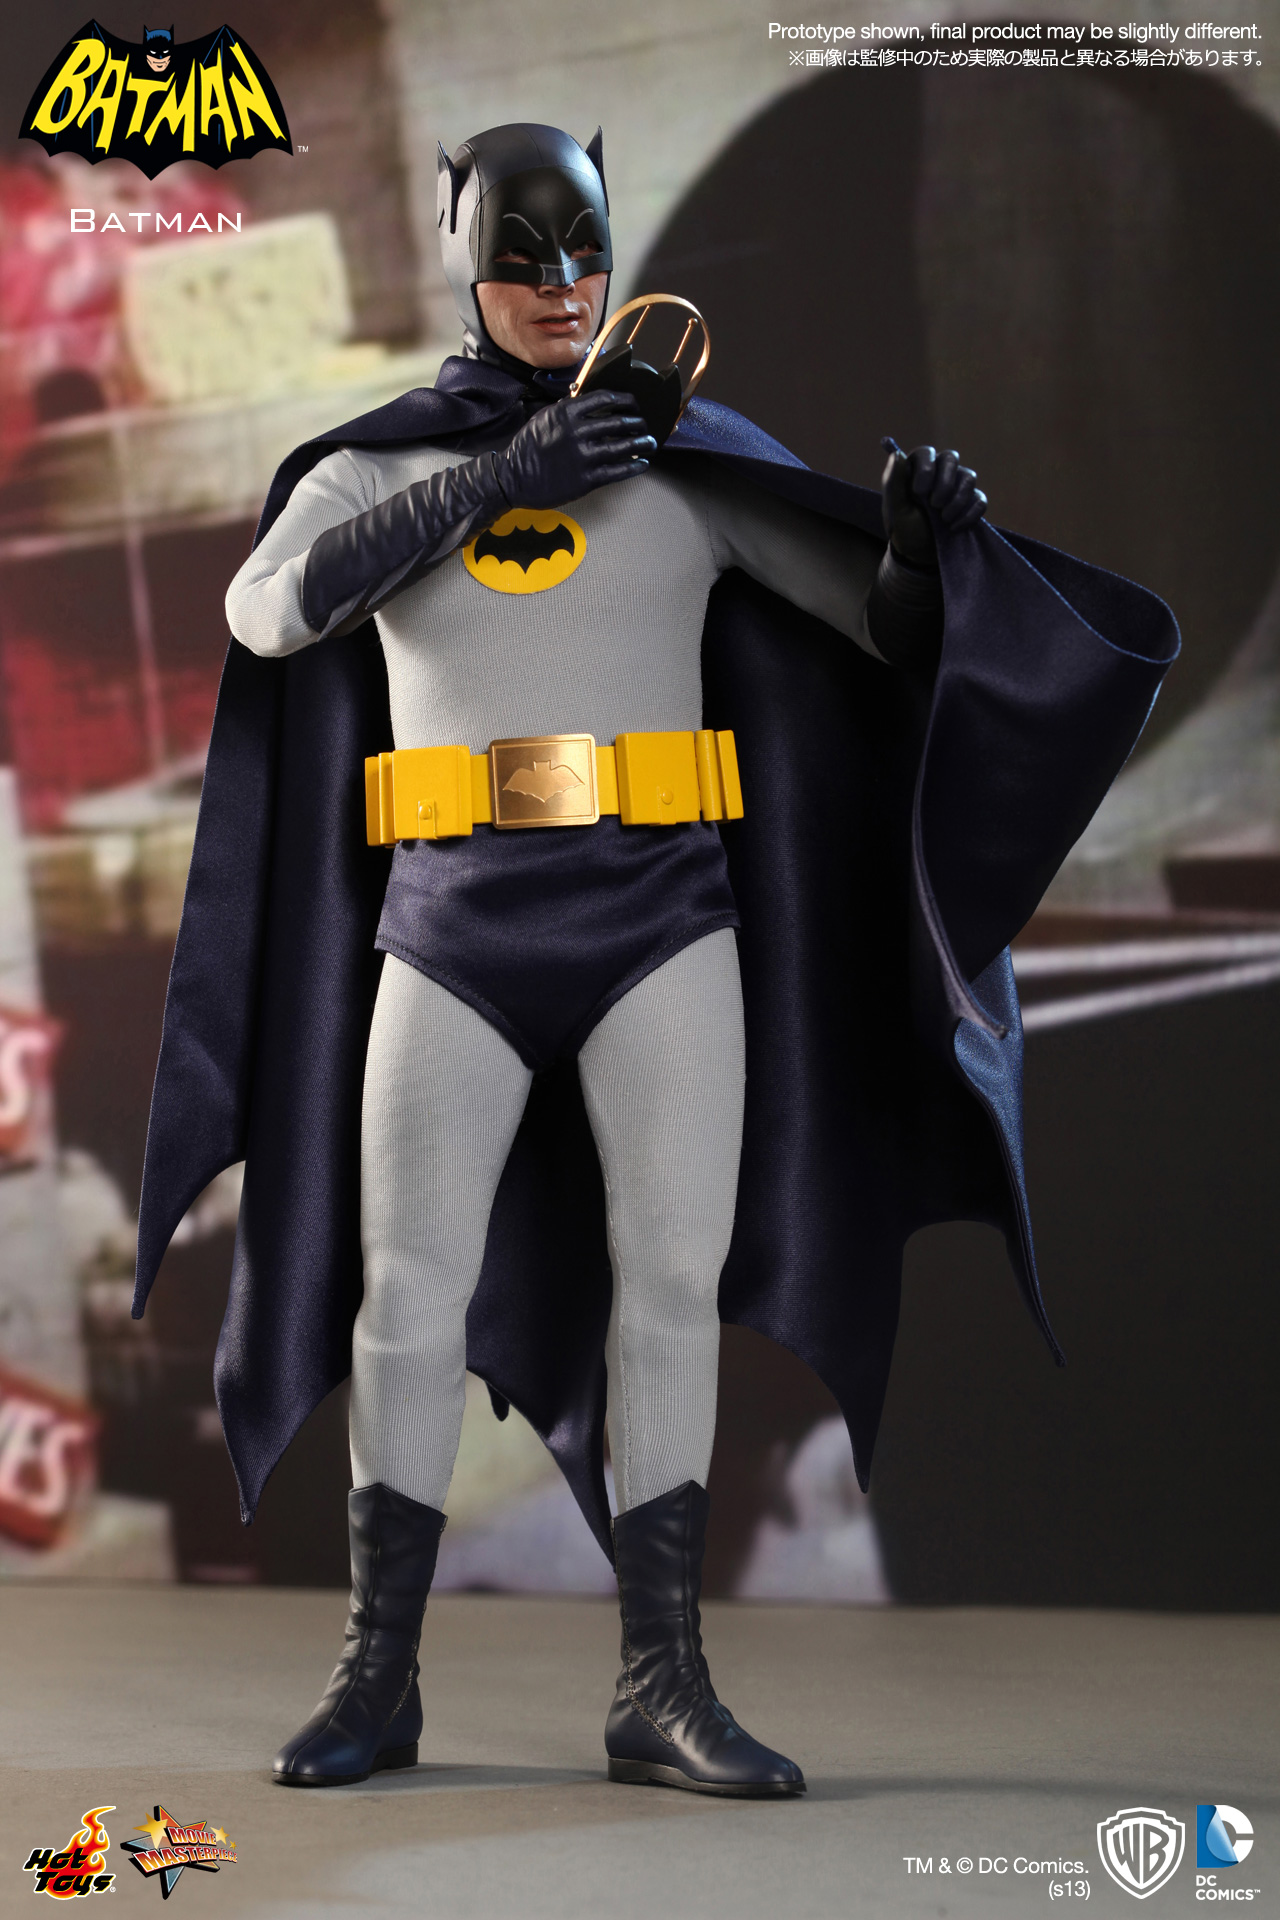 Now THIS Is A Batman Action Figure